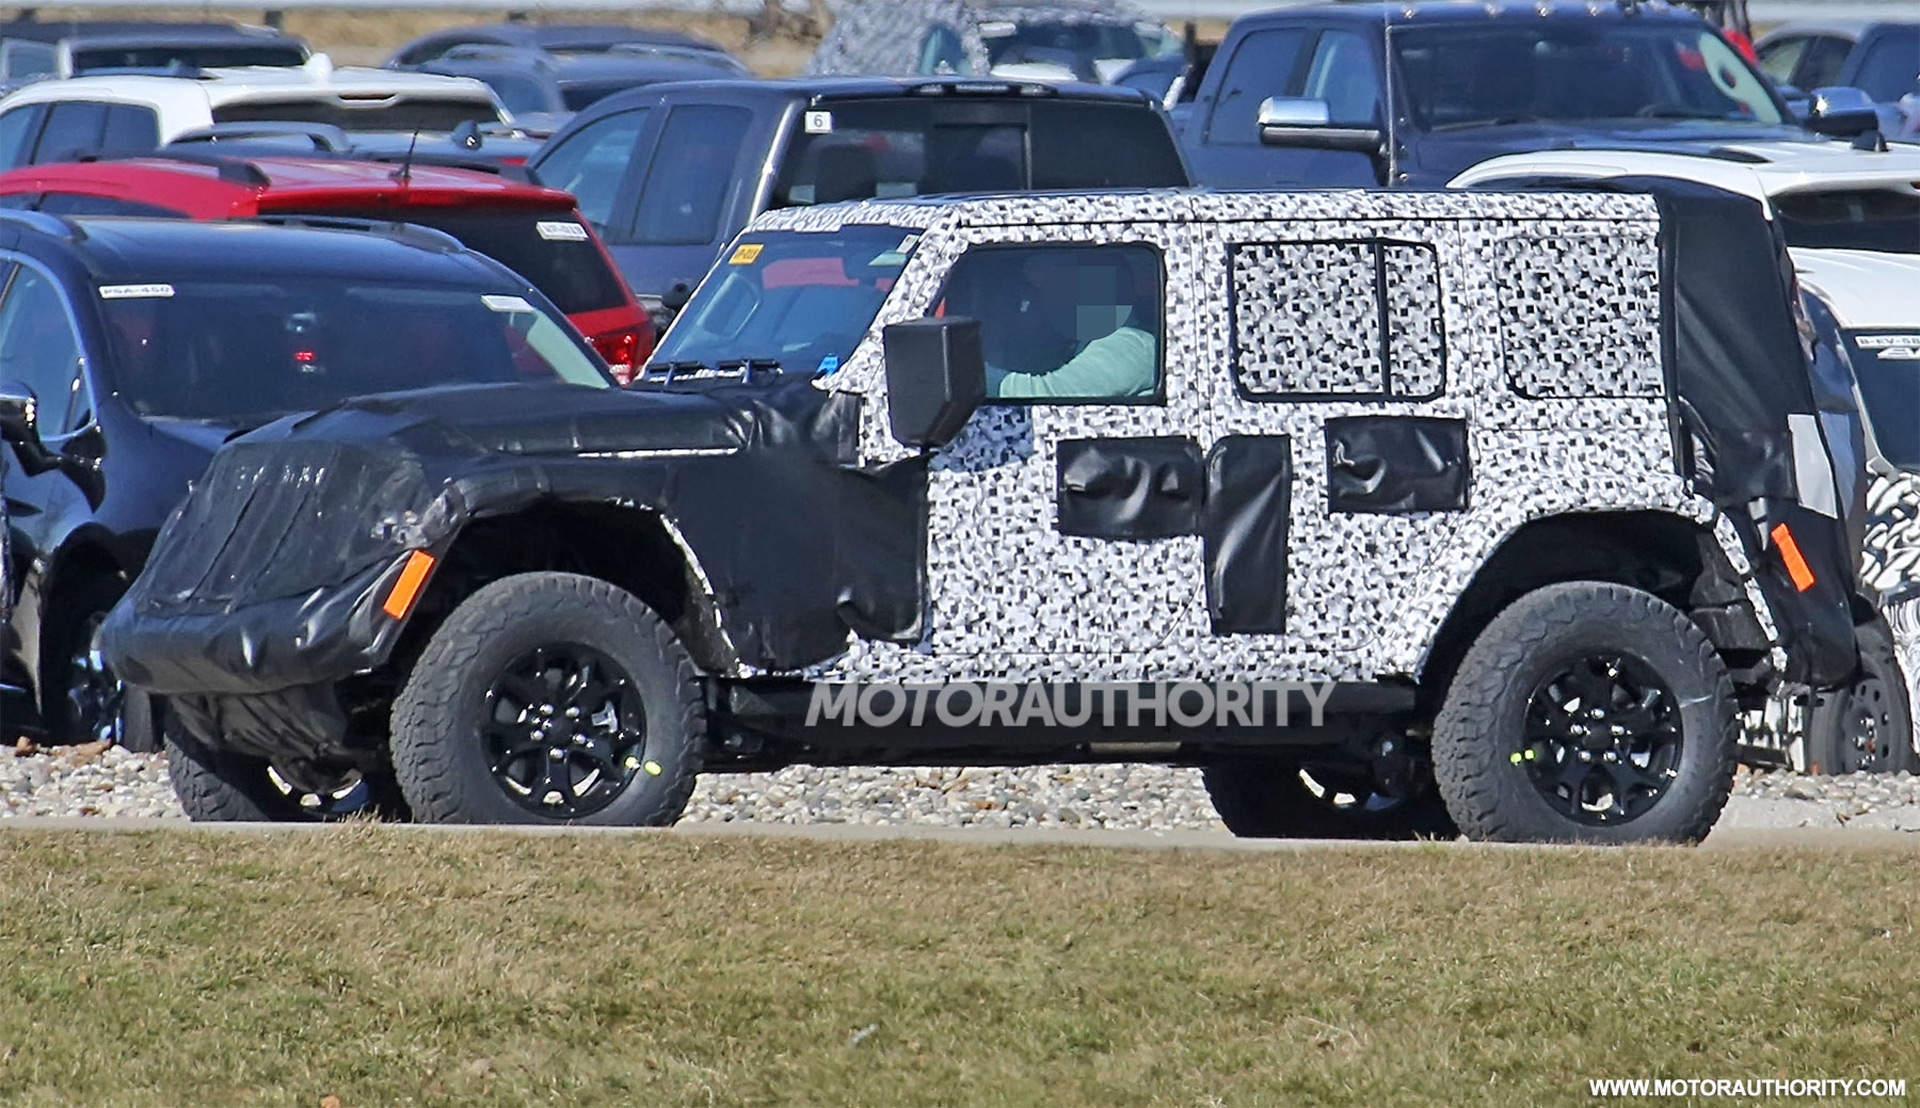 2018 Jeep Wrangler specs leak, full-time 4WD available